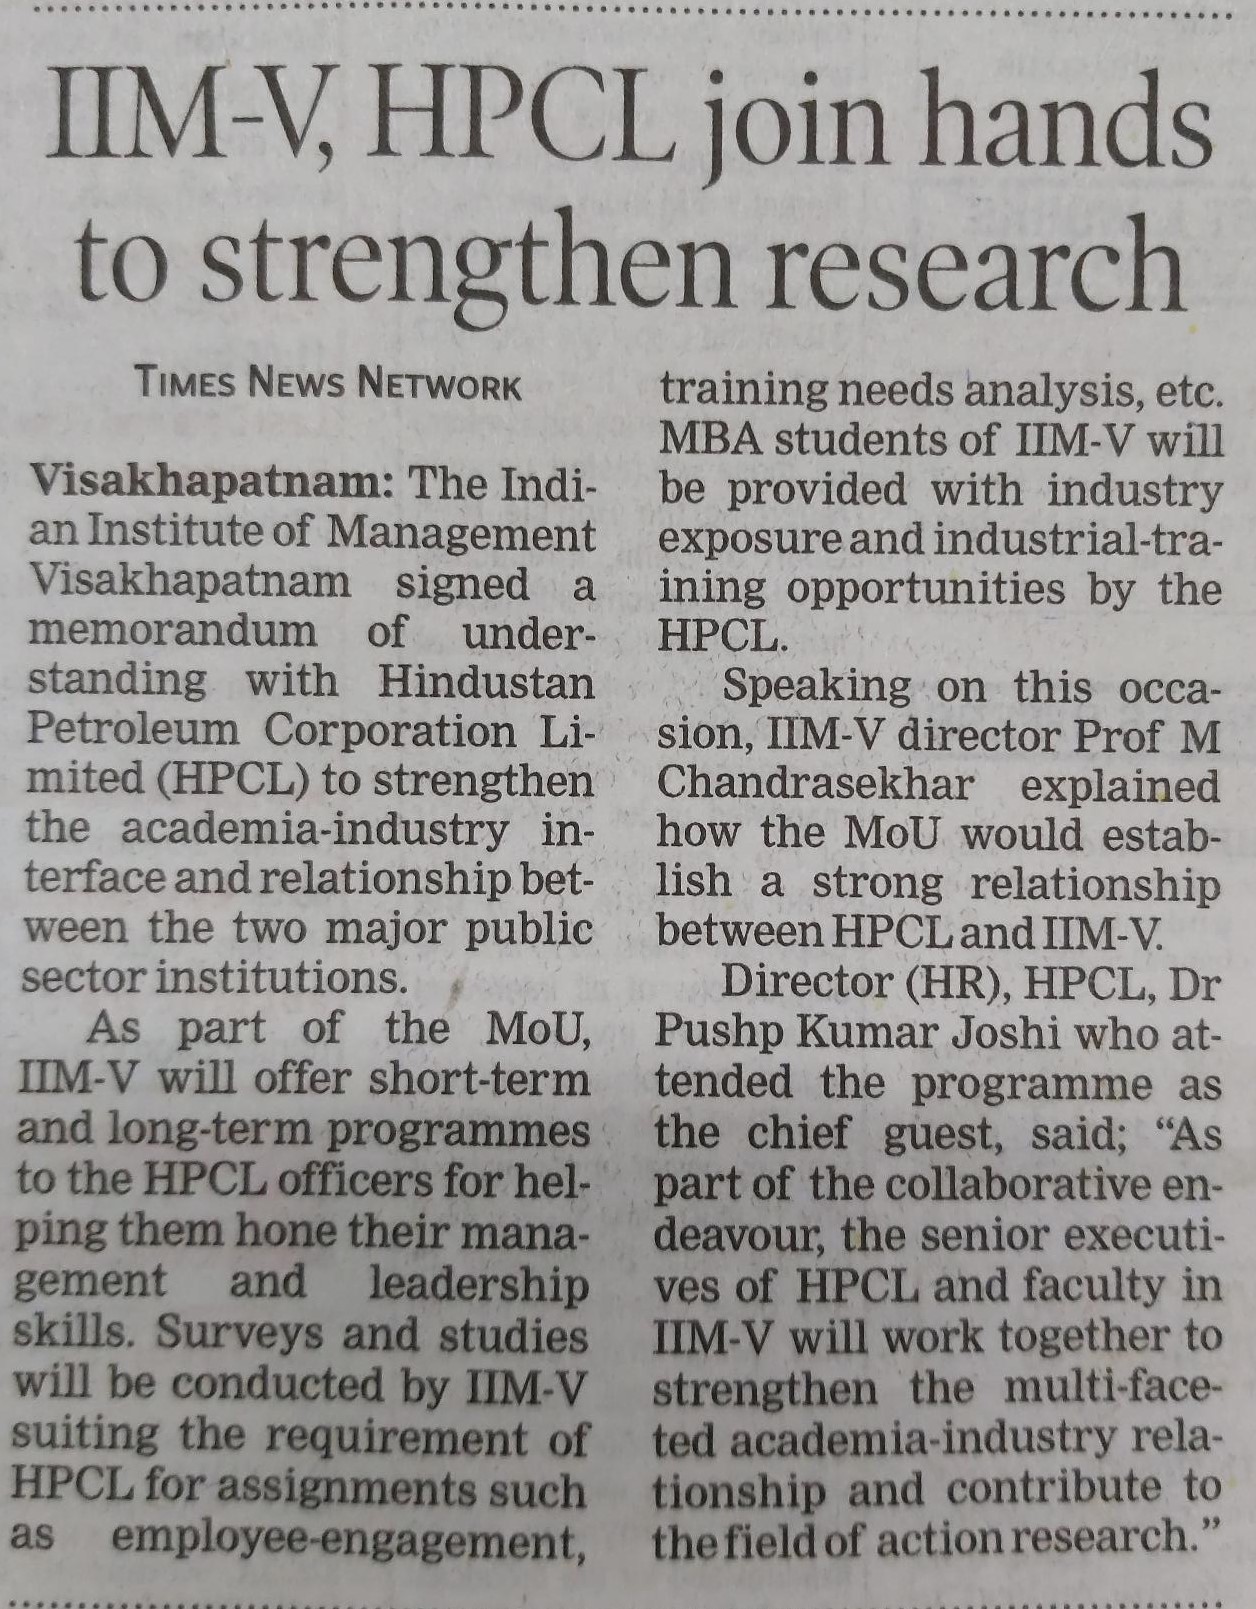 IIM-V HPCL join hands to strengthen research - 20.10.2021